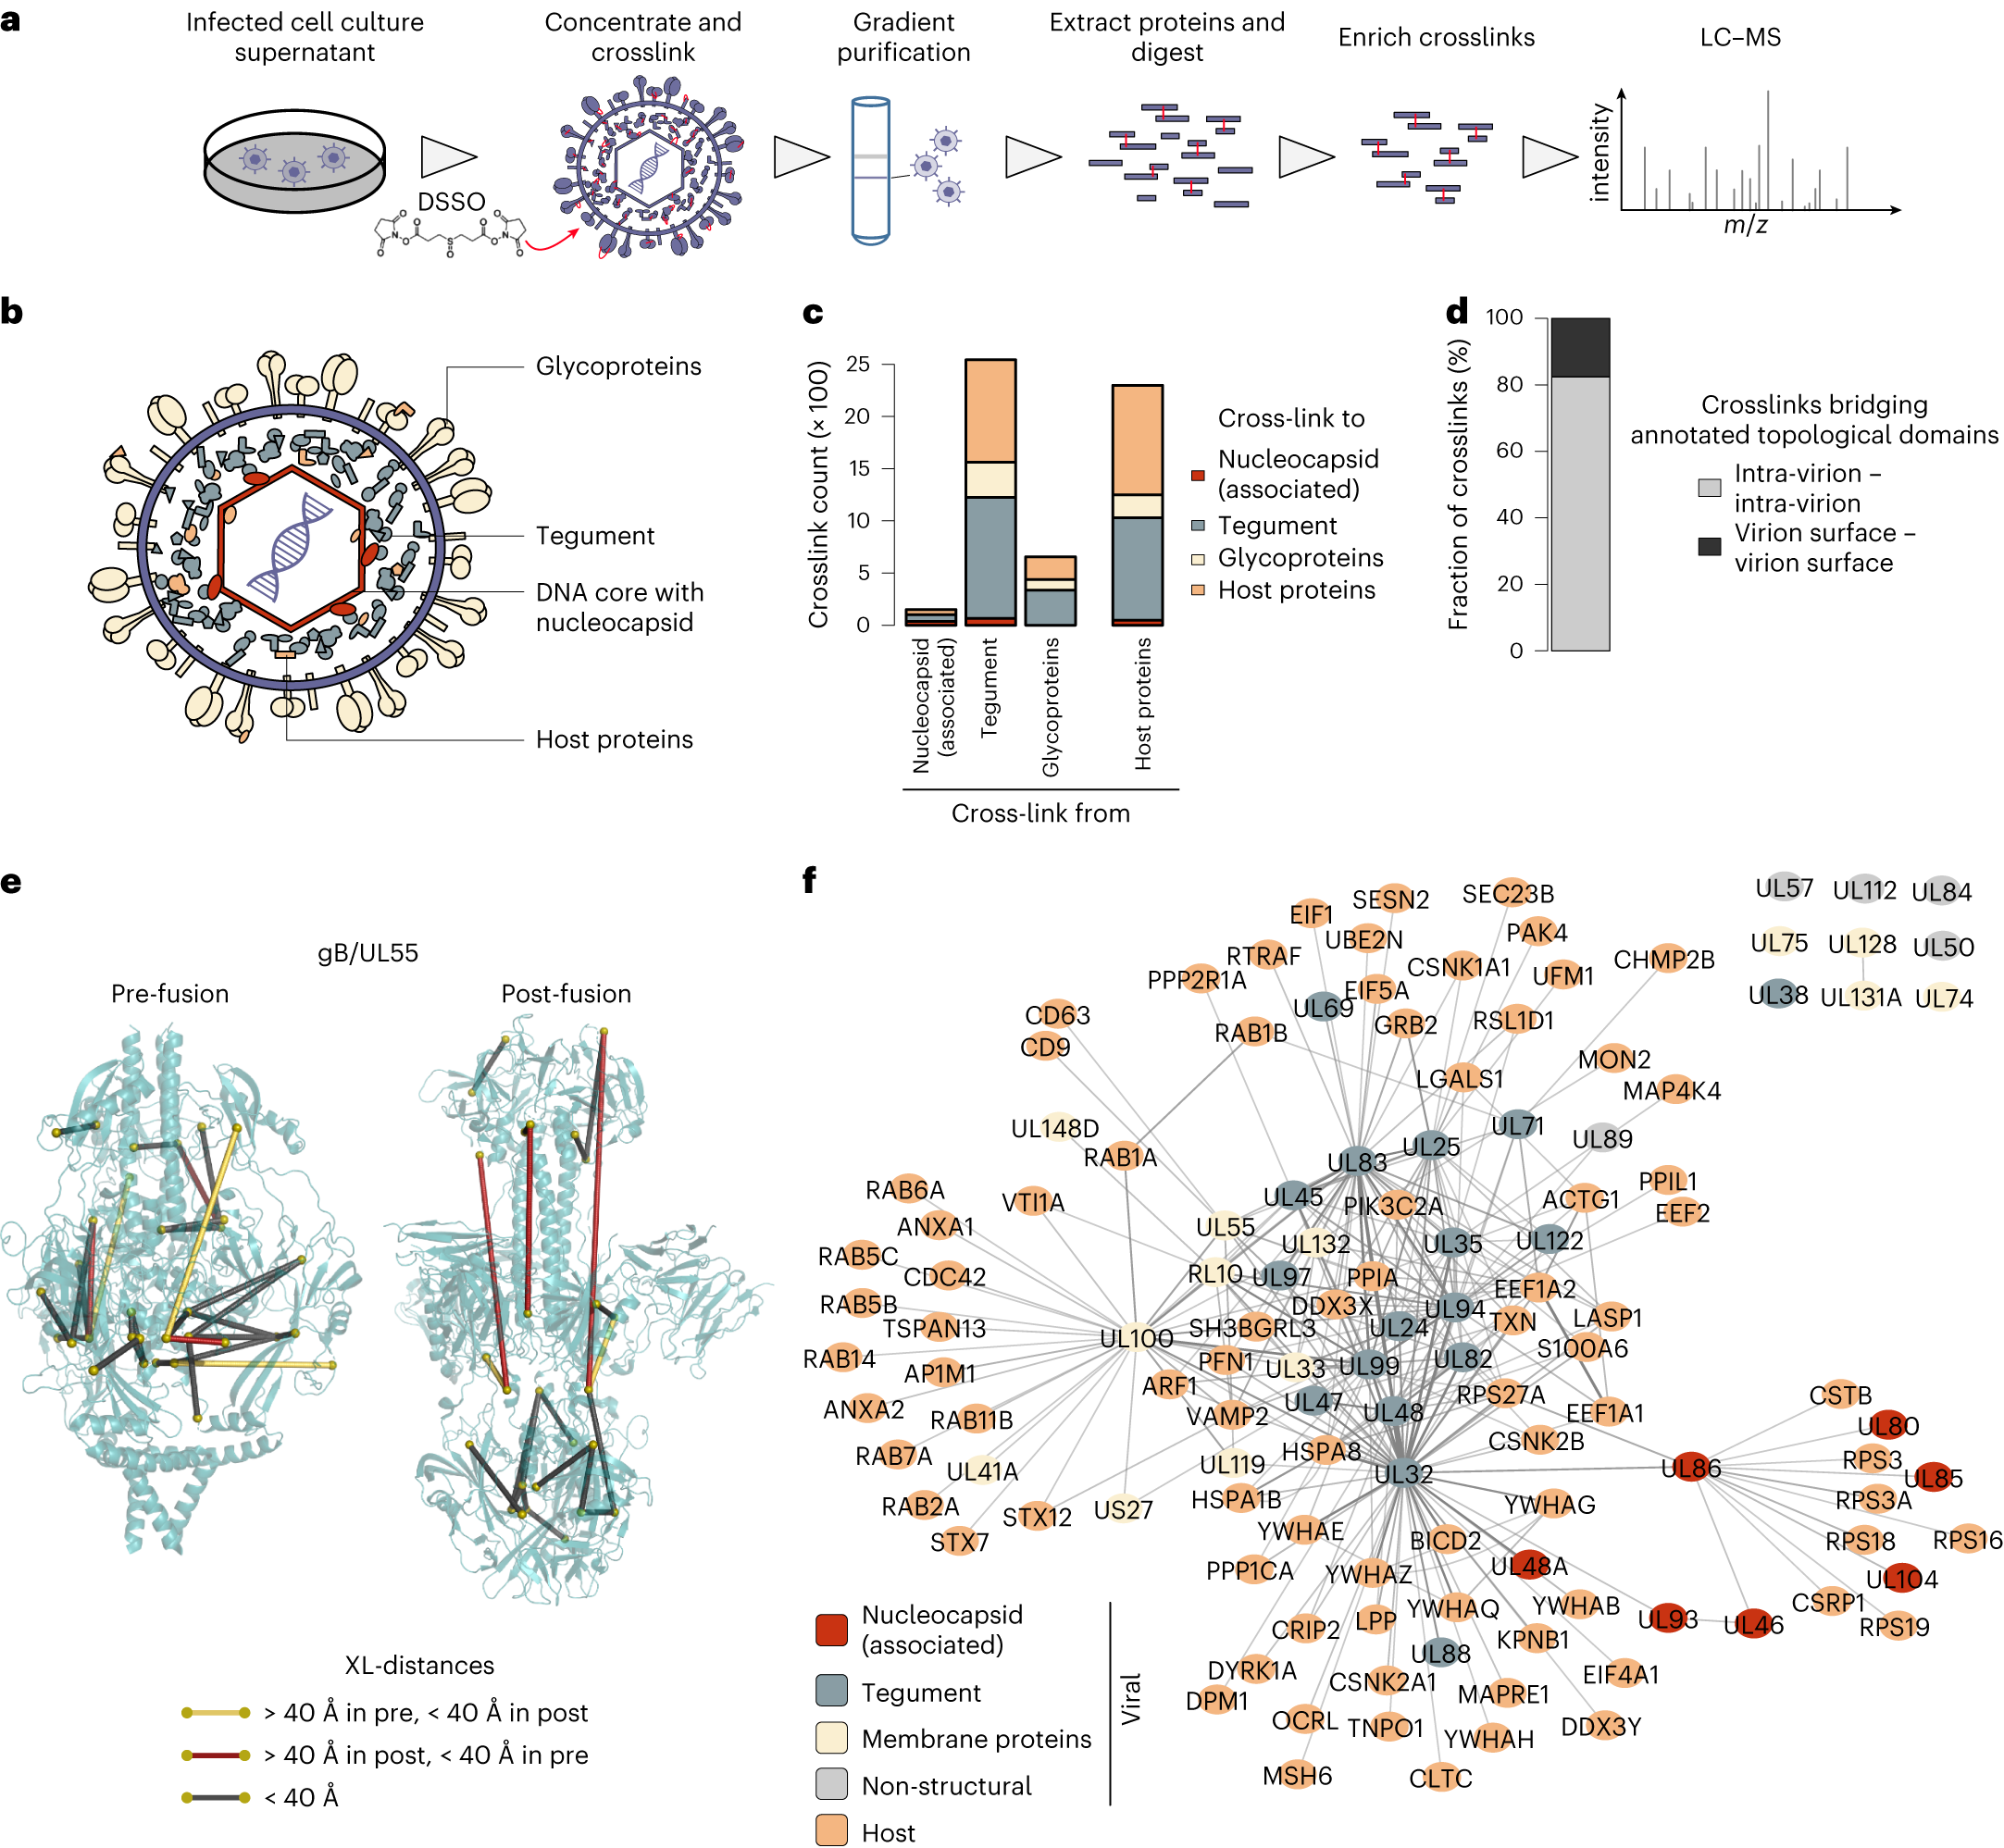 Spatially resolved protein map of intact human cytomegalovirus virions